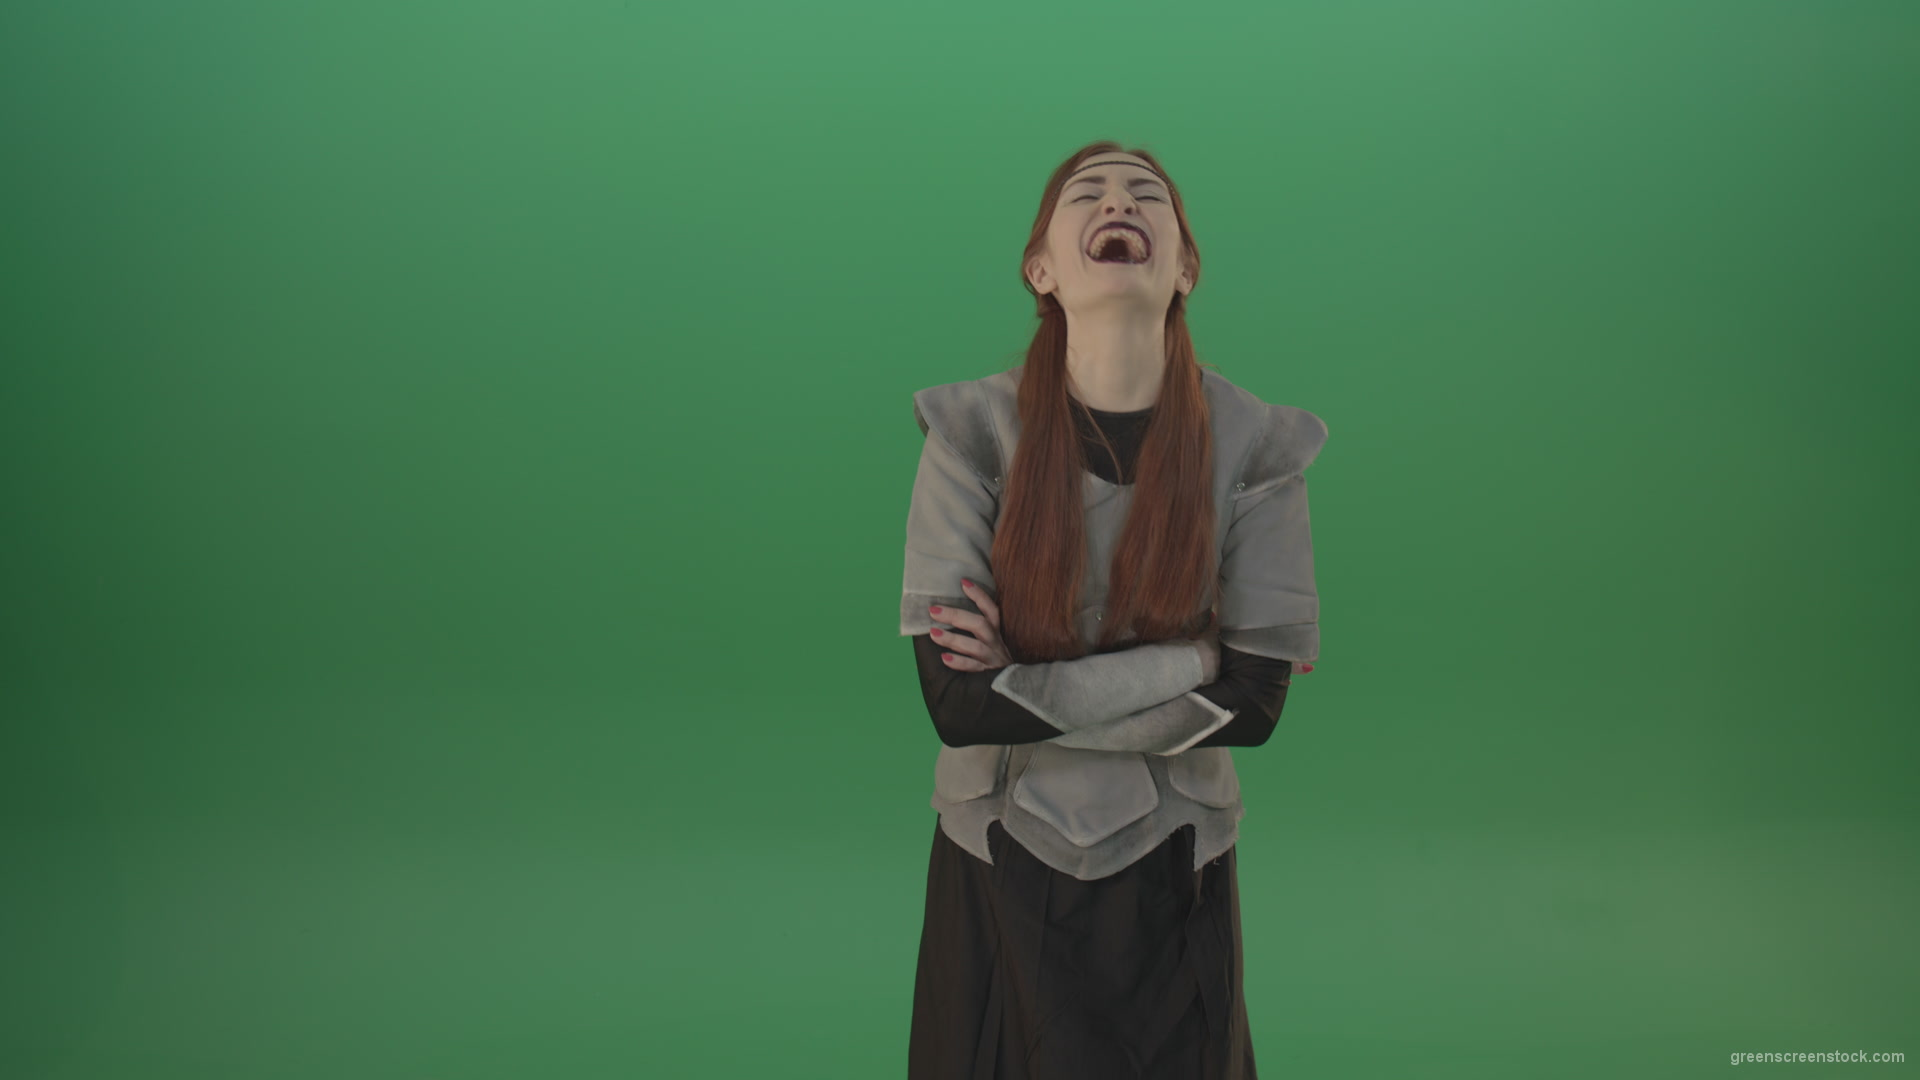 Girl-in-a-medieval-wig-costume-laughs-on-a-green-background-1_002 Green Screen Stock